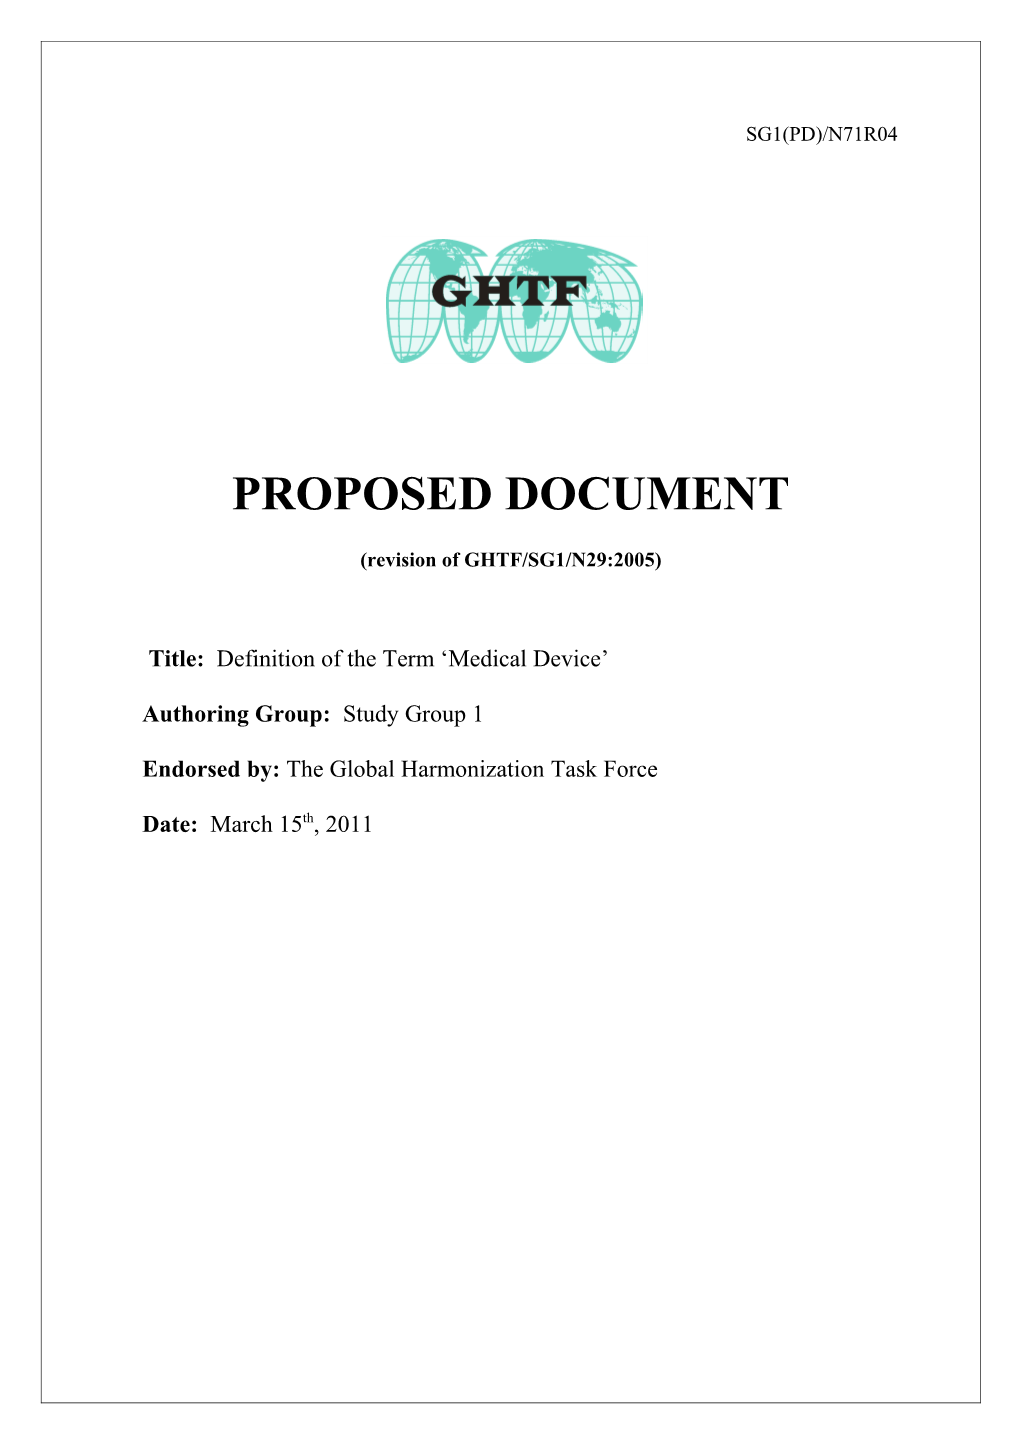 GHTF SG1 - Definition of the Term Medical Device - 15 March 2011